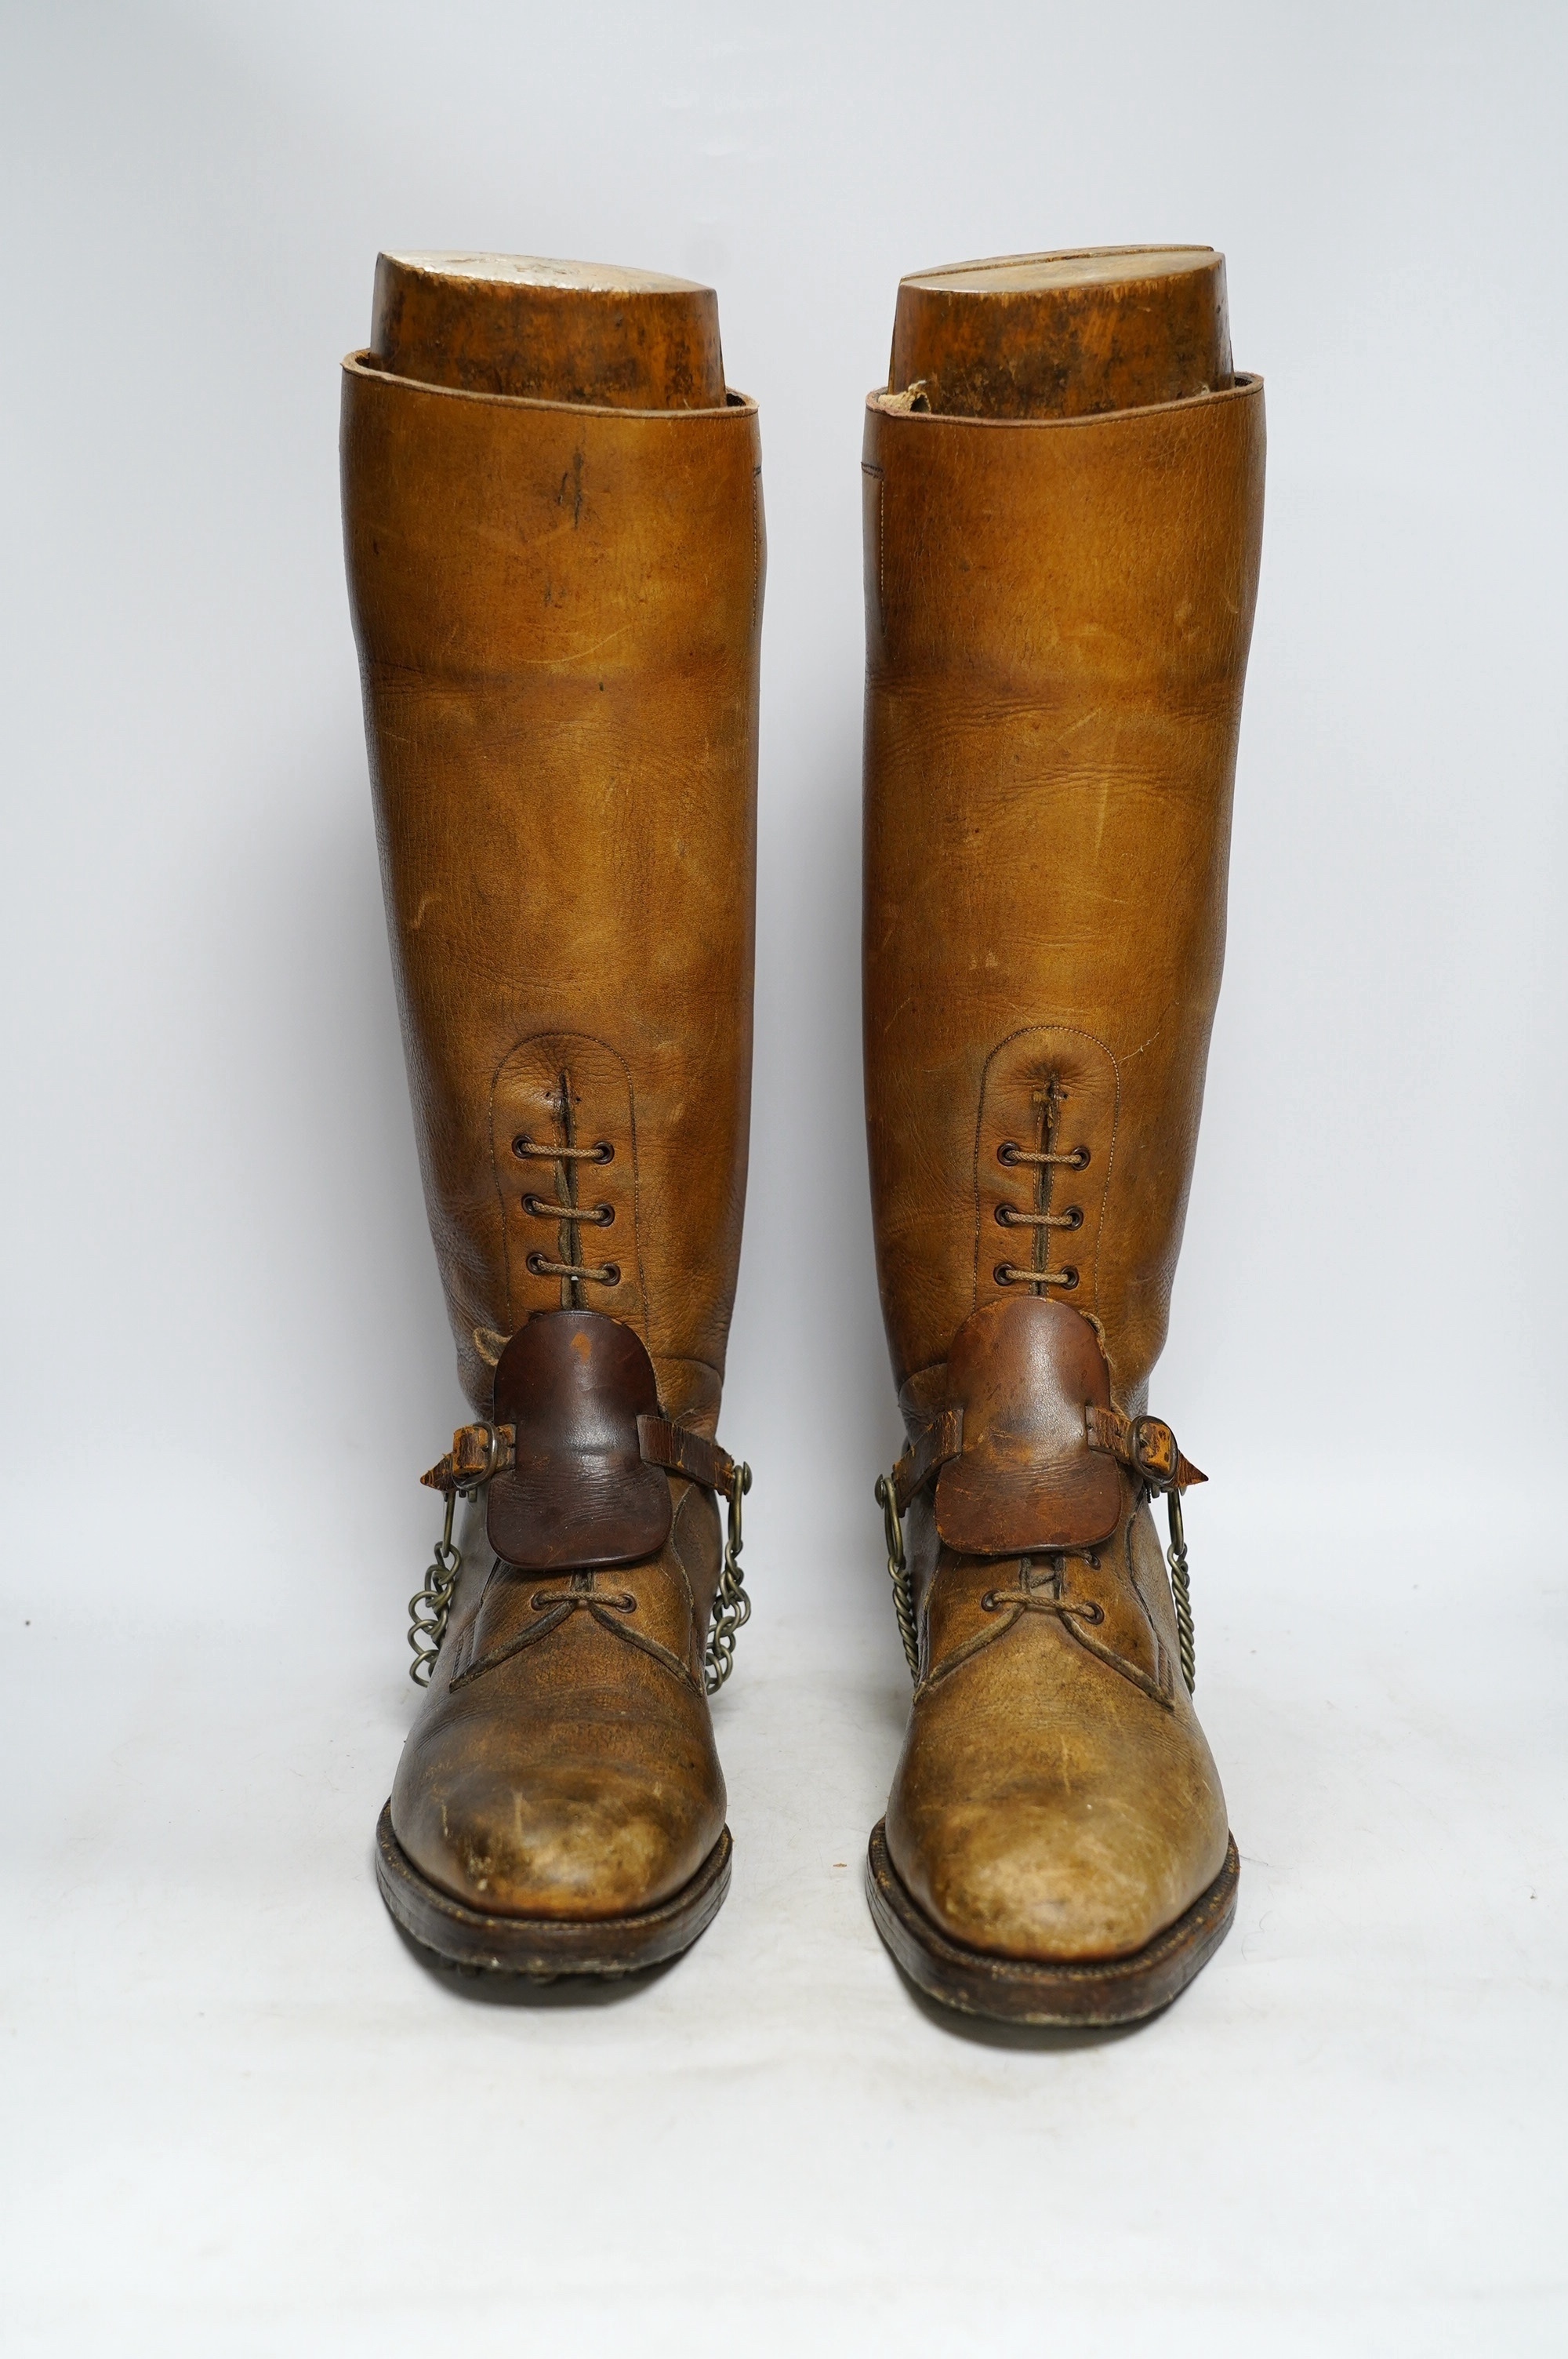 A pair of military First World War boots in tan leather, hobnail soles, two-part wooden shoe trees, and spurs. Condition - fair to good, some rubbing, fading and staining to the leather